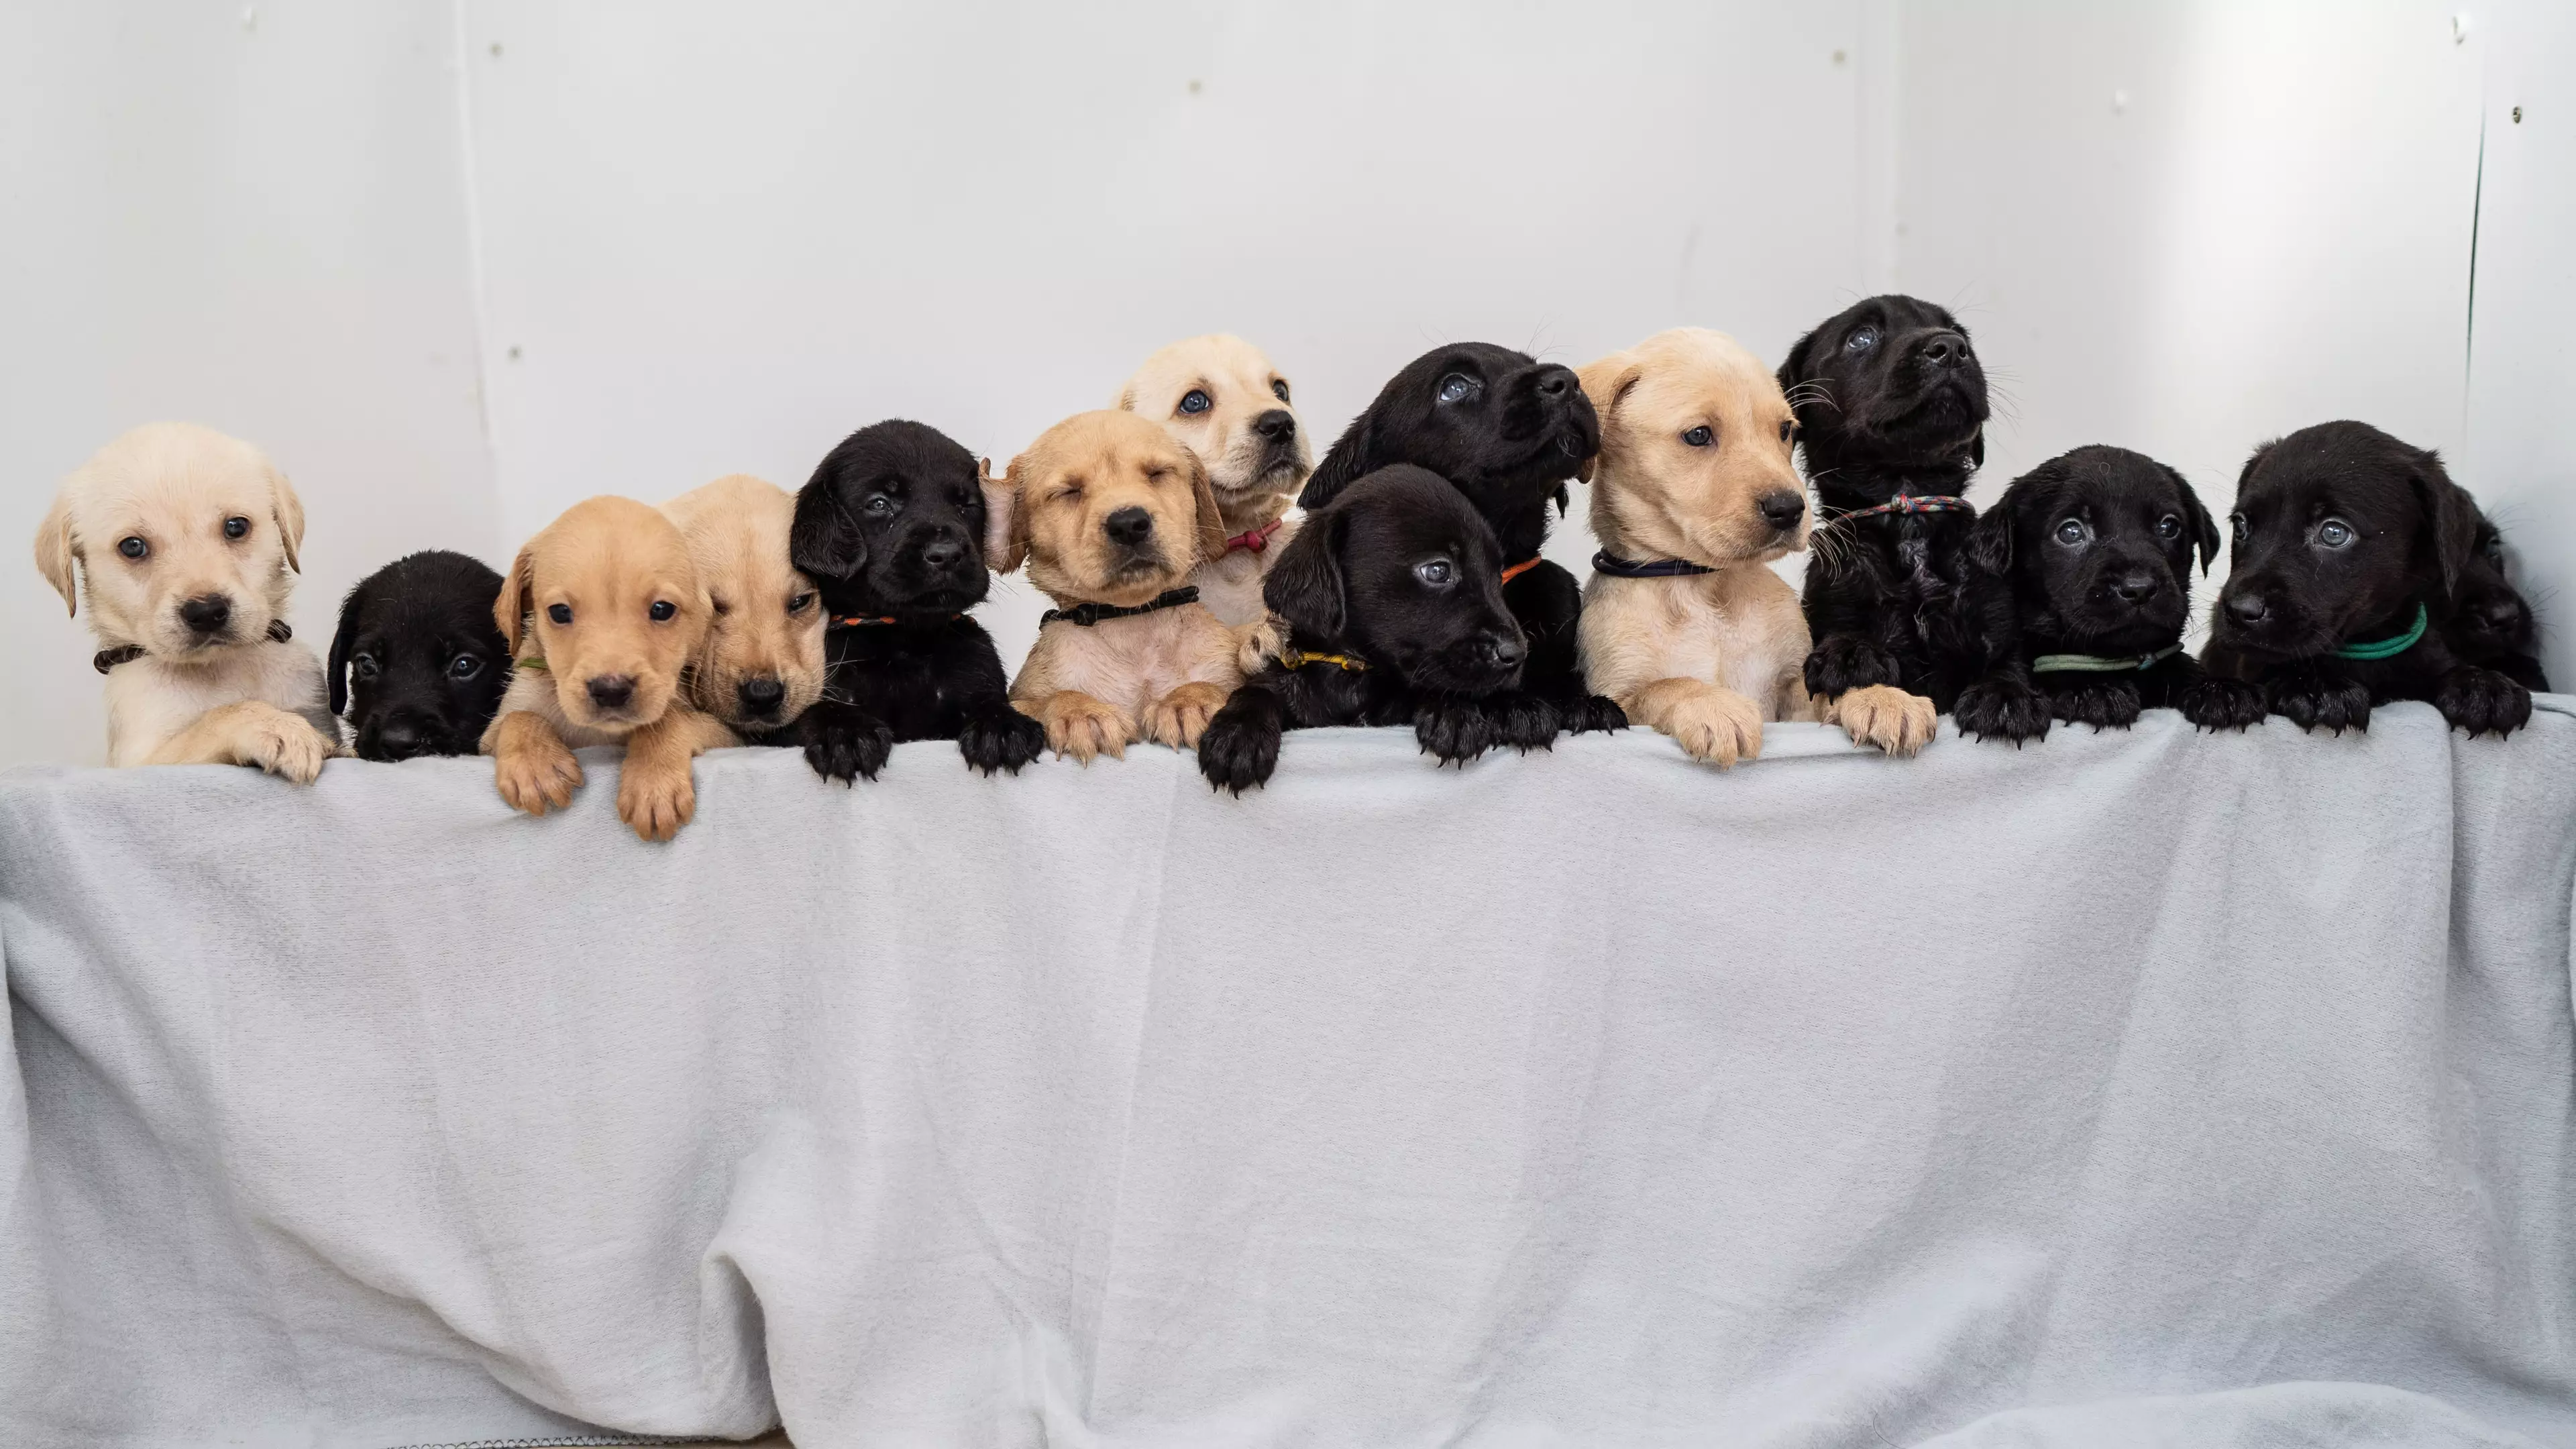 Labrador Gives Birth To One Of The Biggest Litters In History For The Breed